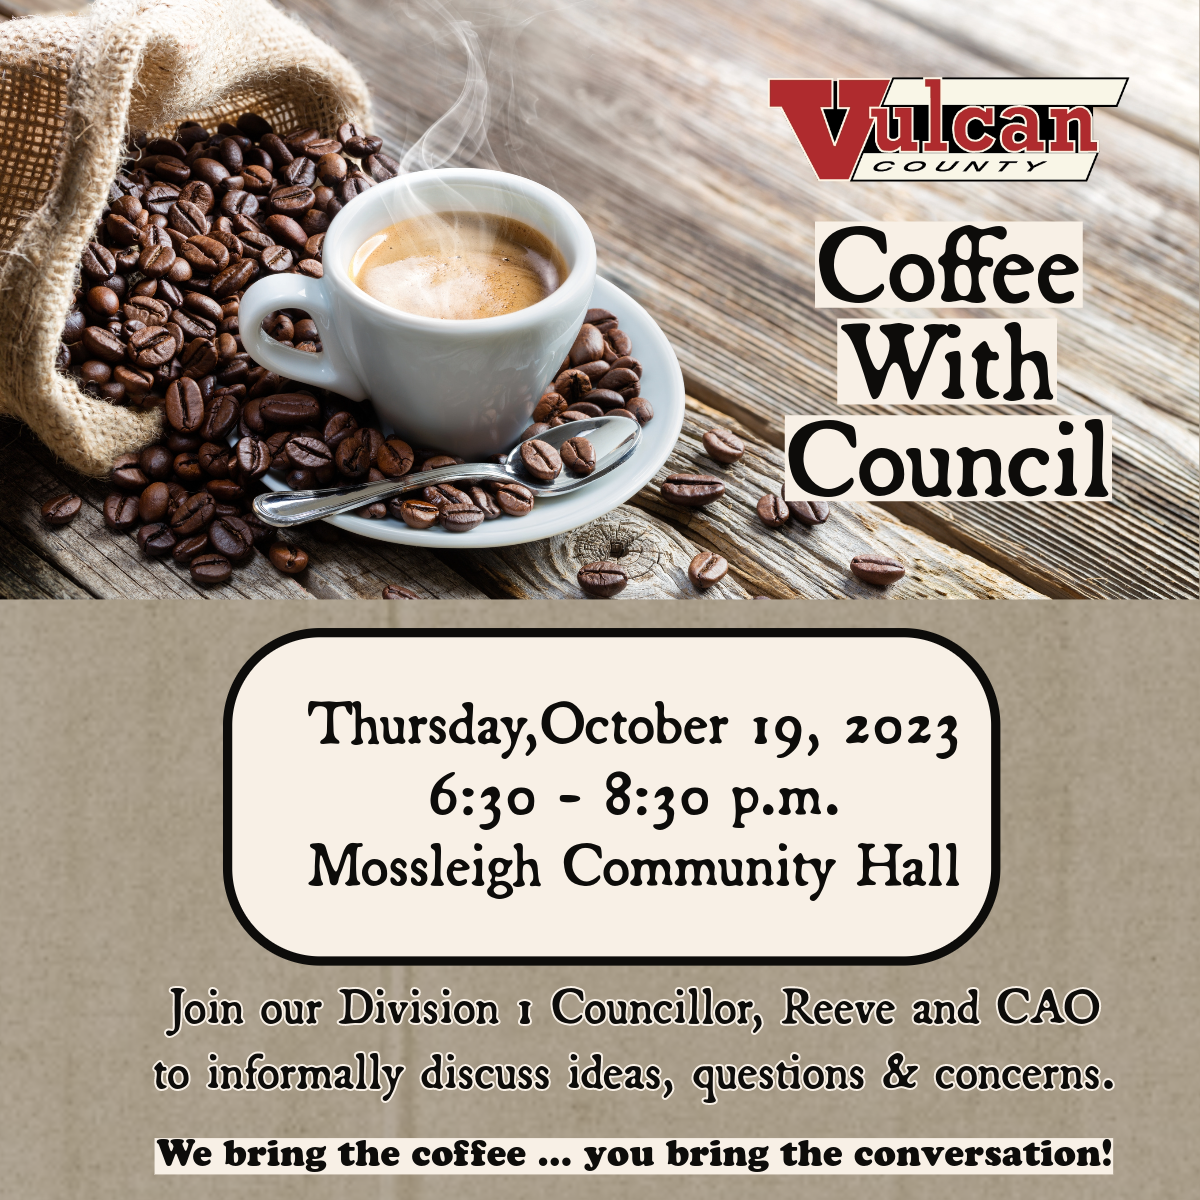 Coffee With Council – Mossleigh Community Hall